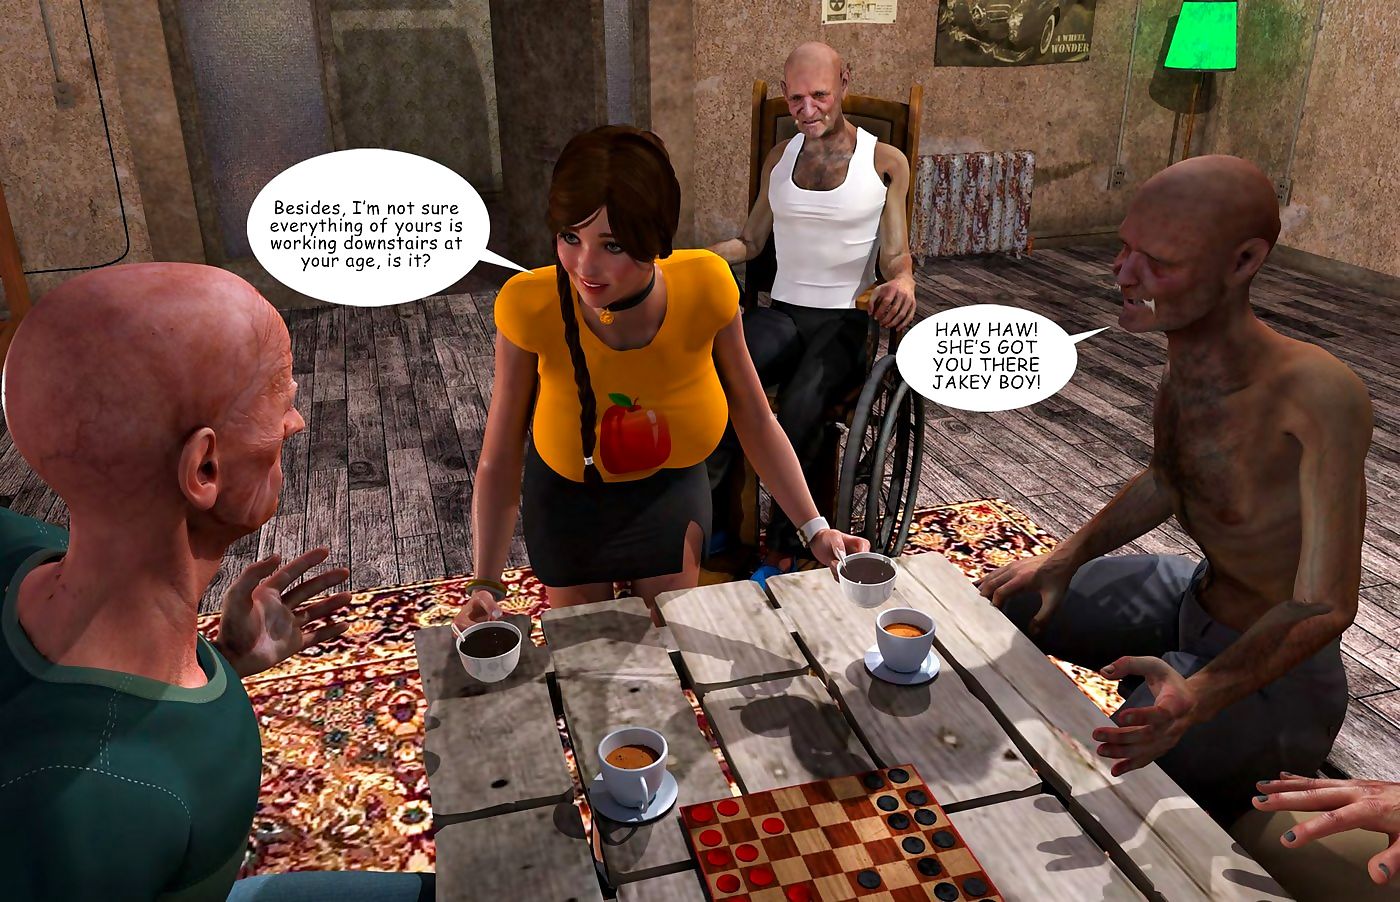 Lost Bet – Petra Helps The Elderly page 1